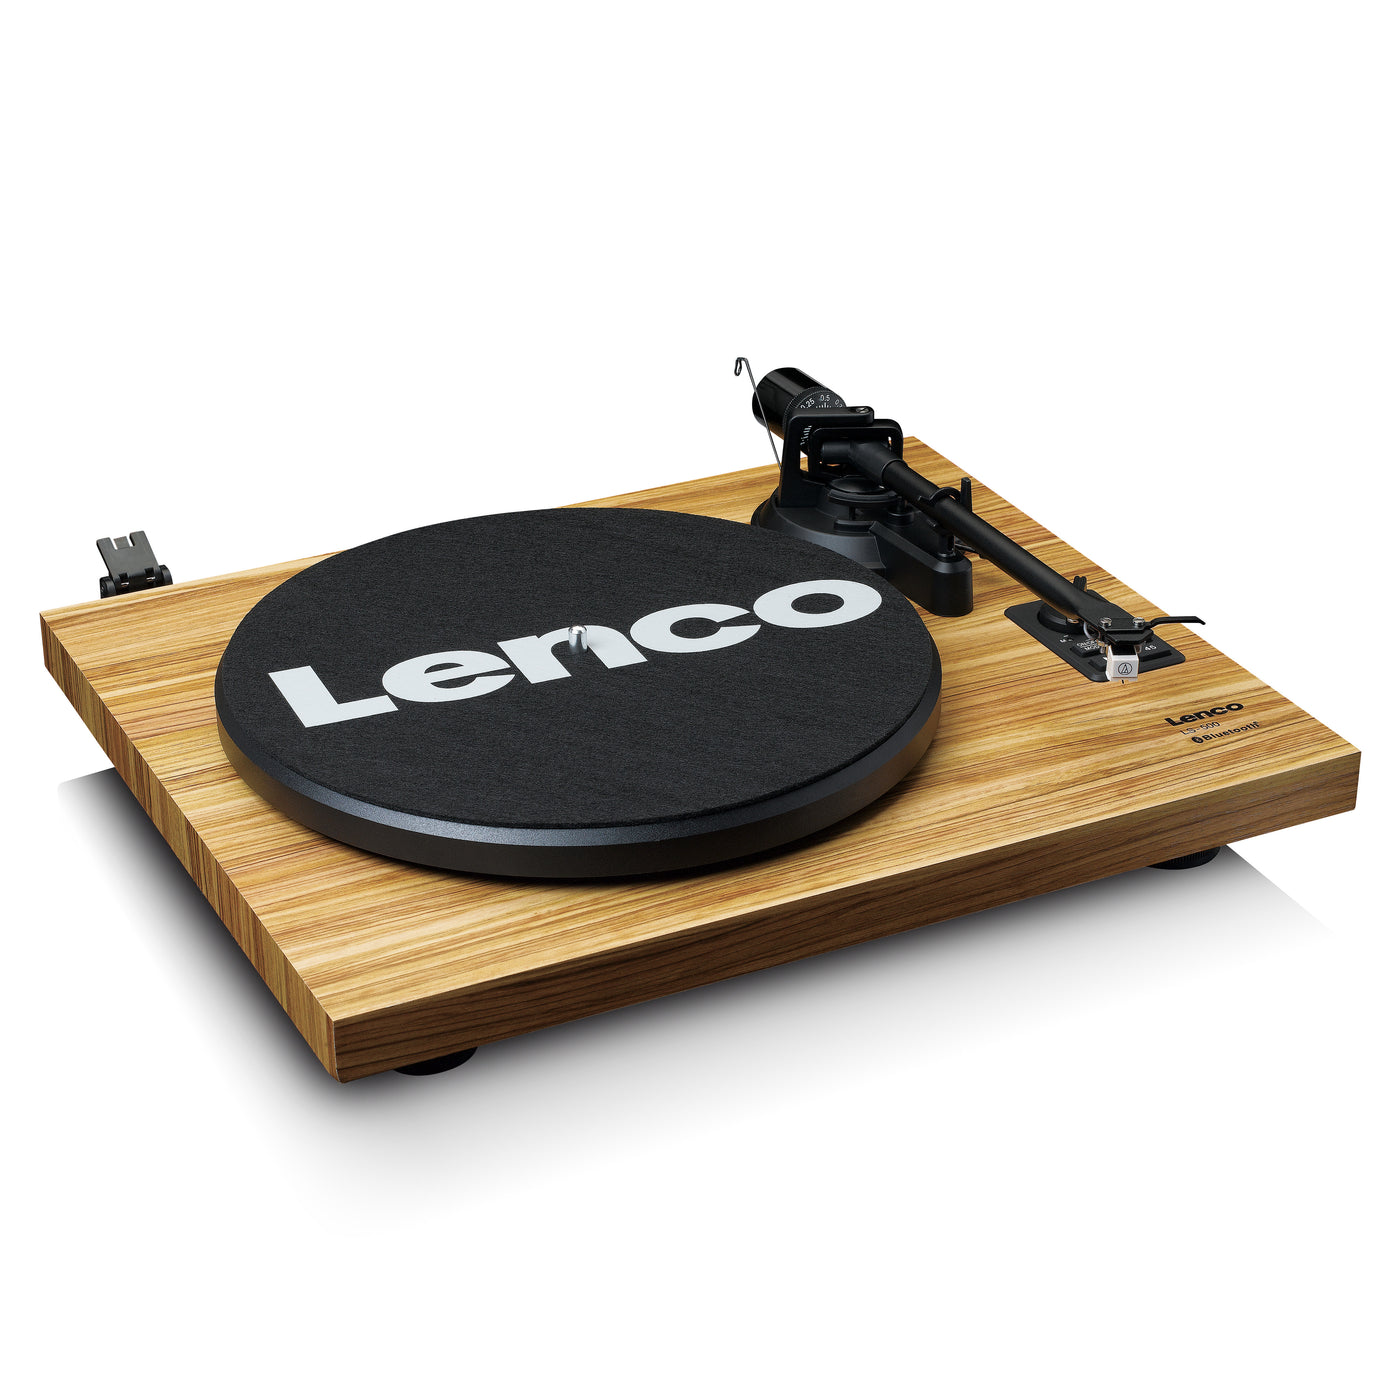 LENCO LS-500OK - Record player with built-in amplifier and Bluetooth® plus 2 external speakers - Wood